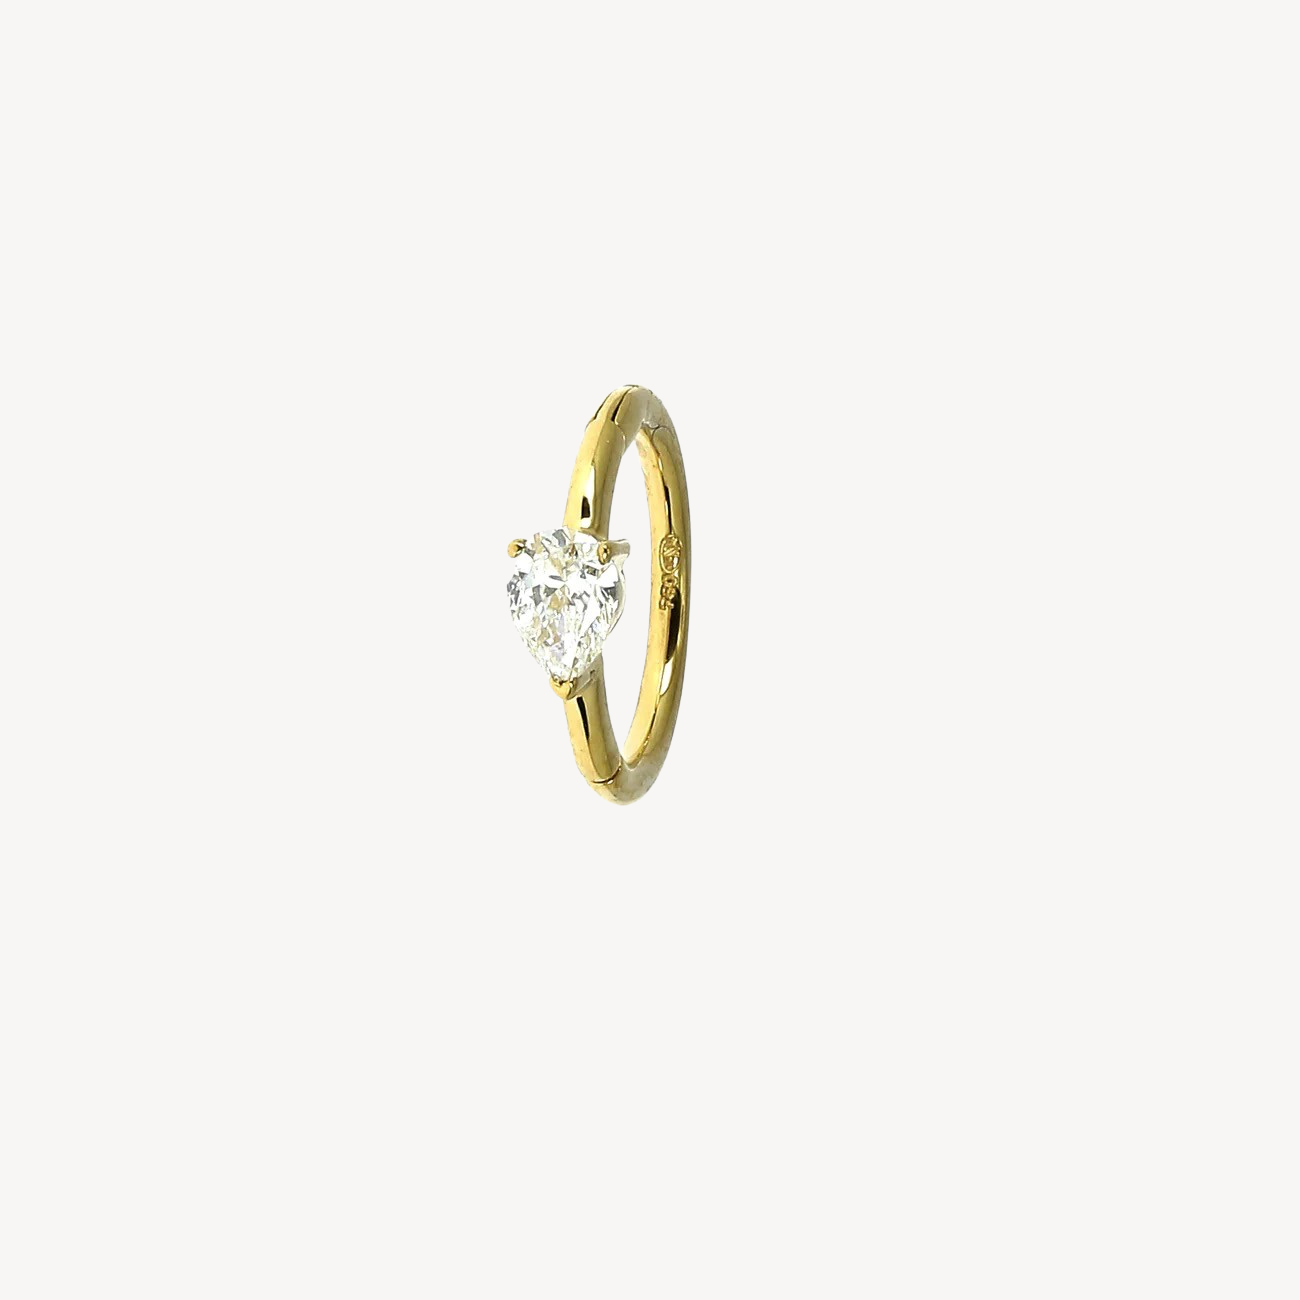 8mm Yellow Gold Pear 3.5x2.5mm Hoop